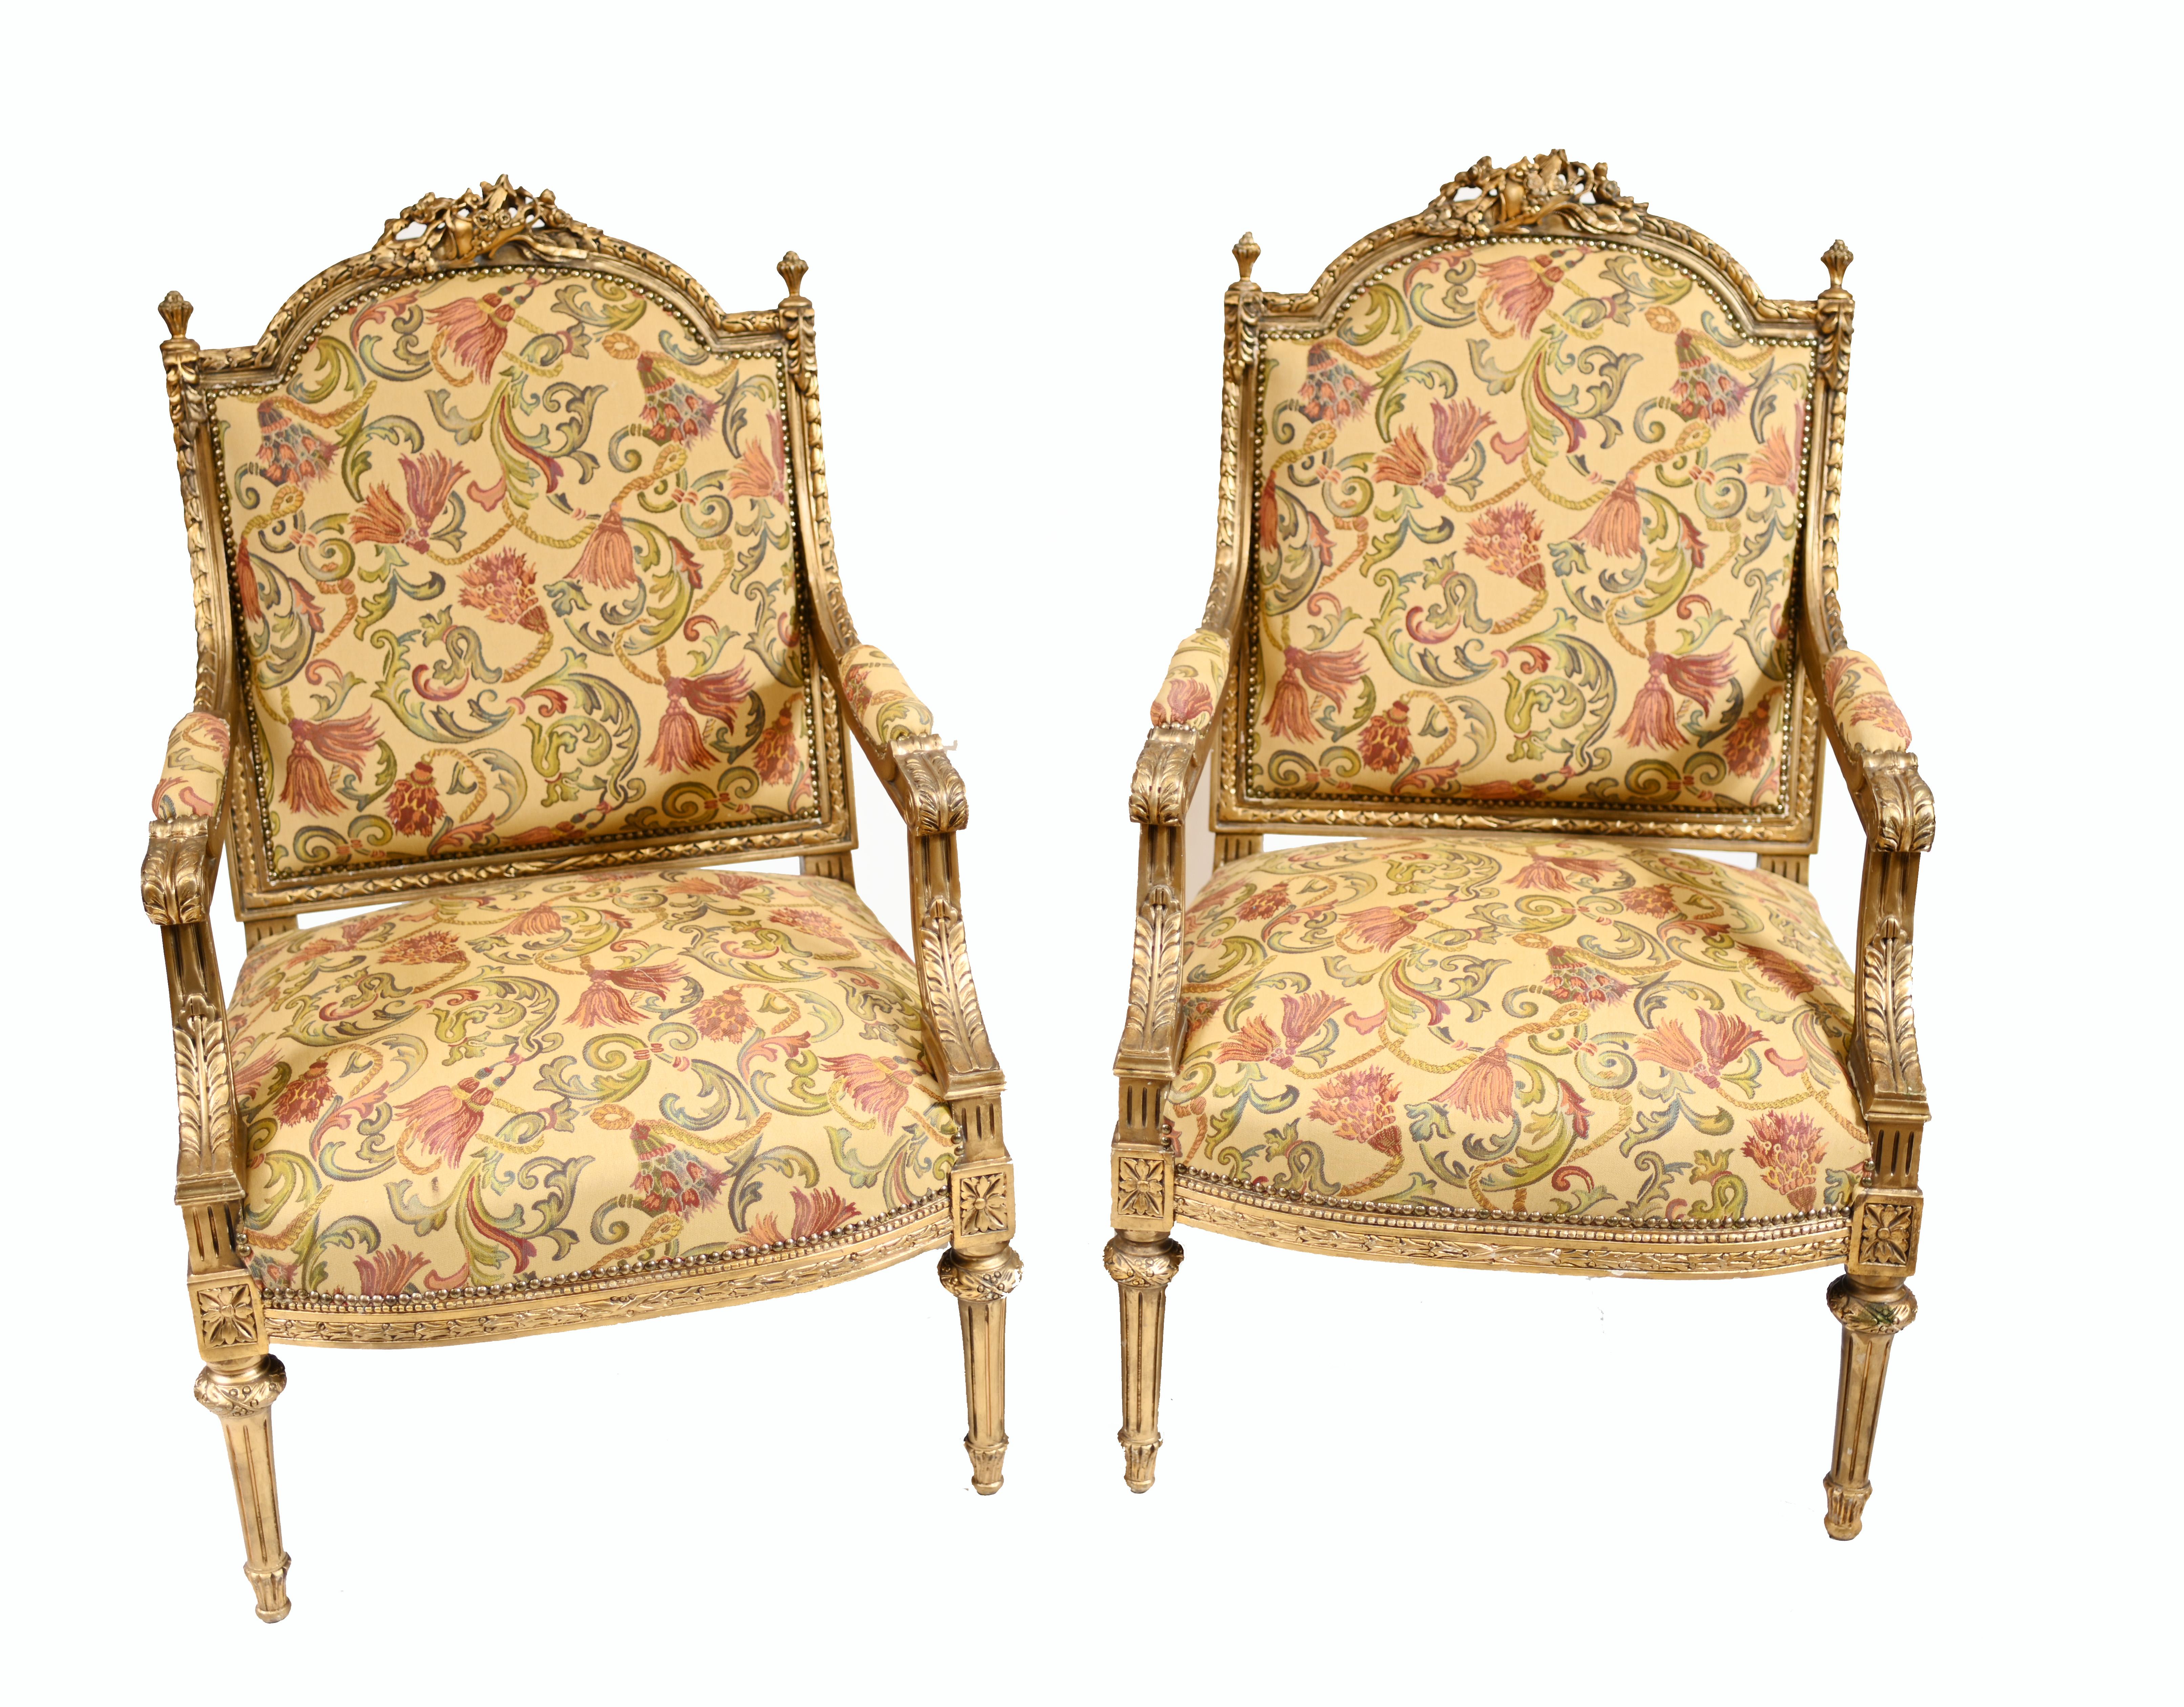 Classic pair of French antique arm chairs
handcrafted from gilt with upholstered arms
Freshly re-upholstered with woven floral pattern
Bought from a dealer on Rue de Rossiers at the Paris antiques markets
Great interiors piece
We can ship to